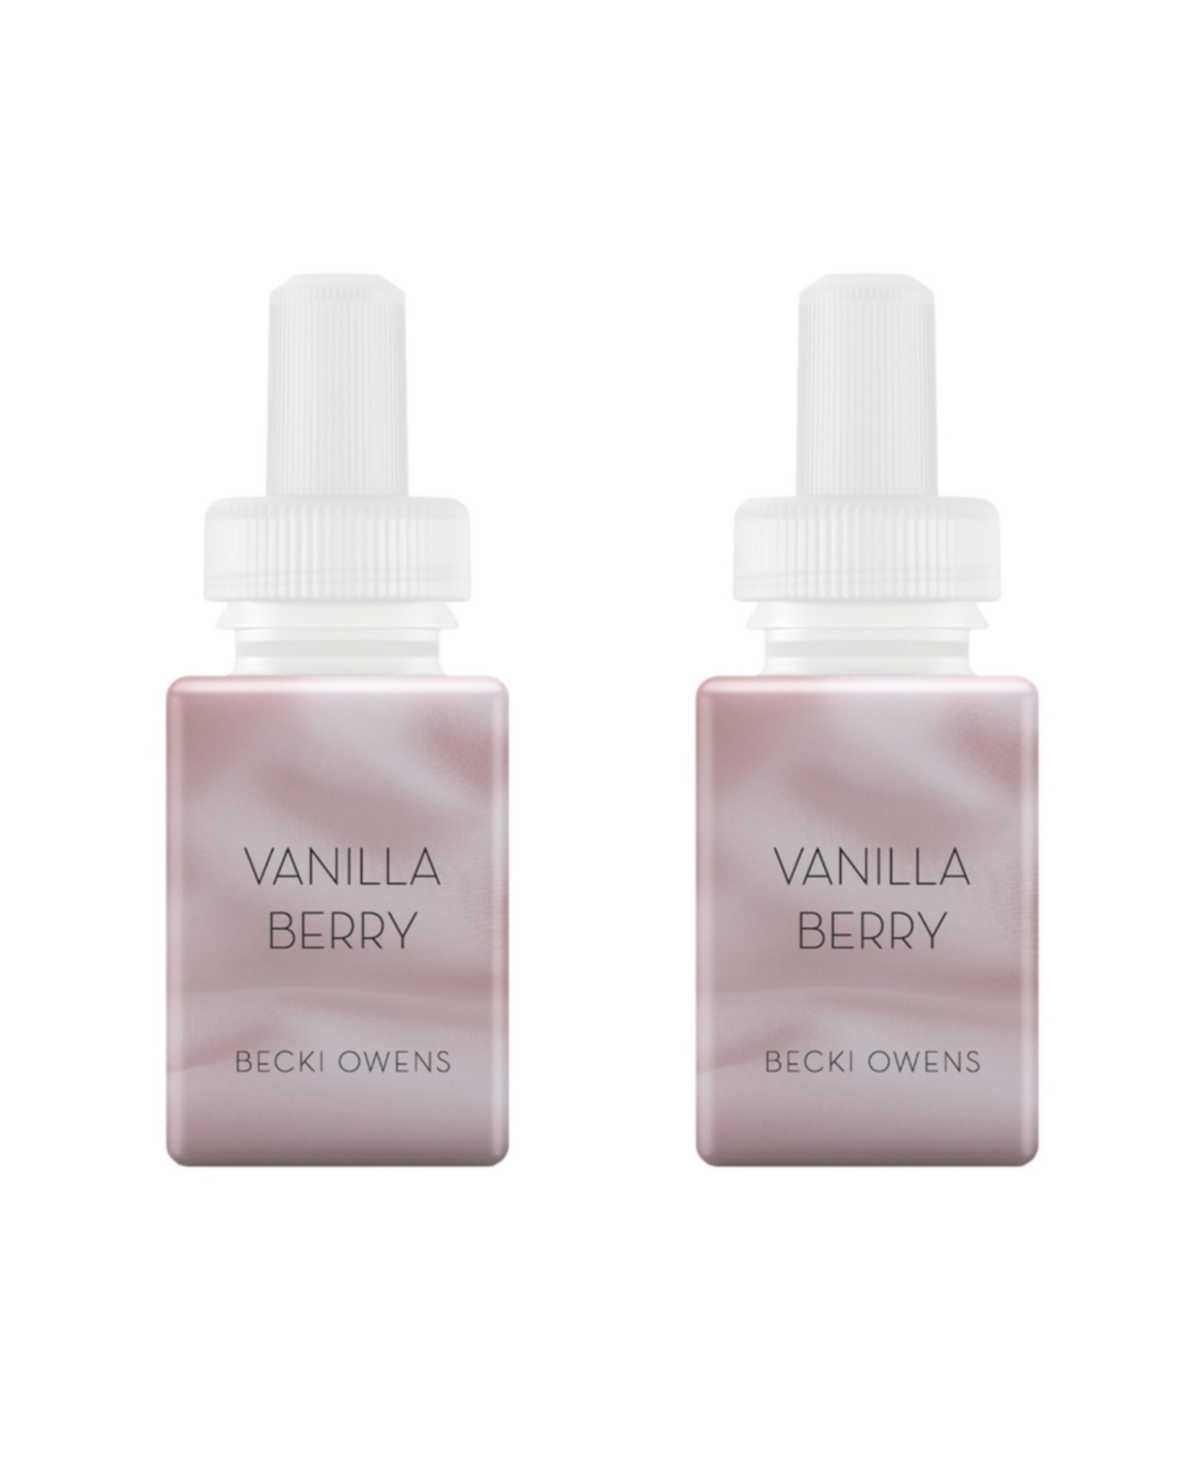 Becki Owens - Vanilla Berry - Home Scent Refill - Smart Home Air Diffuser Fragrance - Up to 120-Hours of Premium Fragrance per Refill - Household